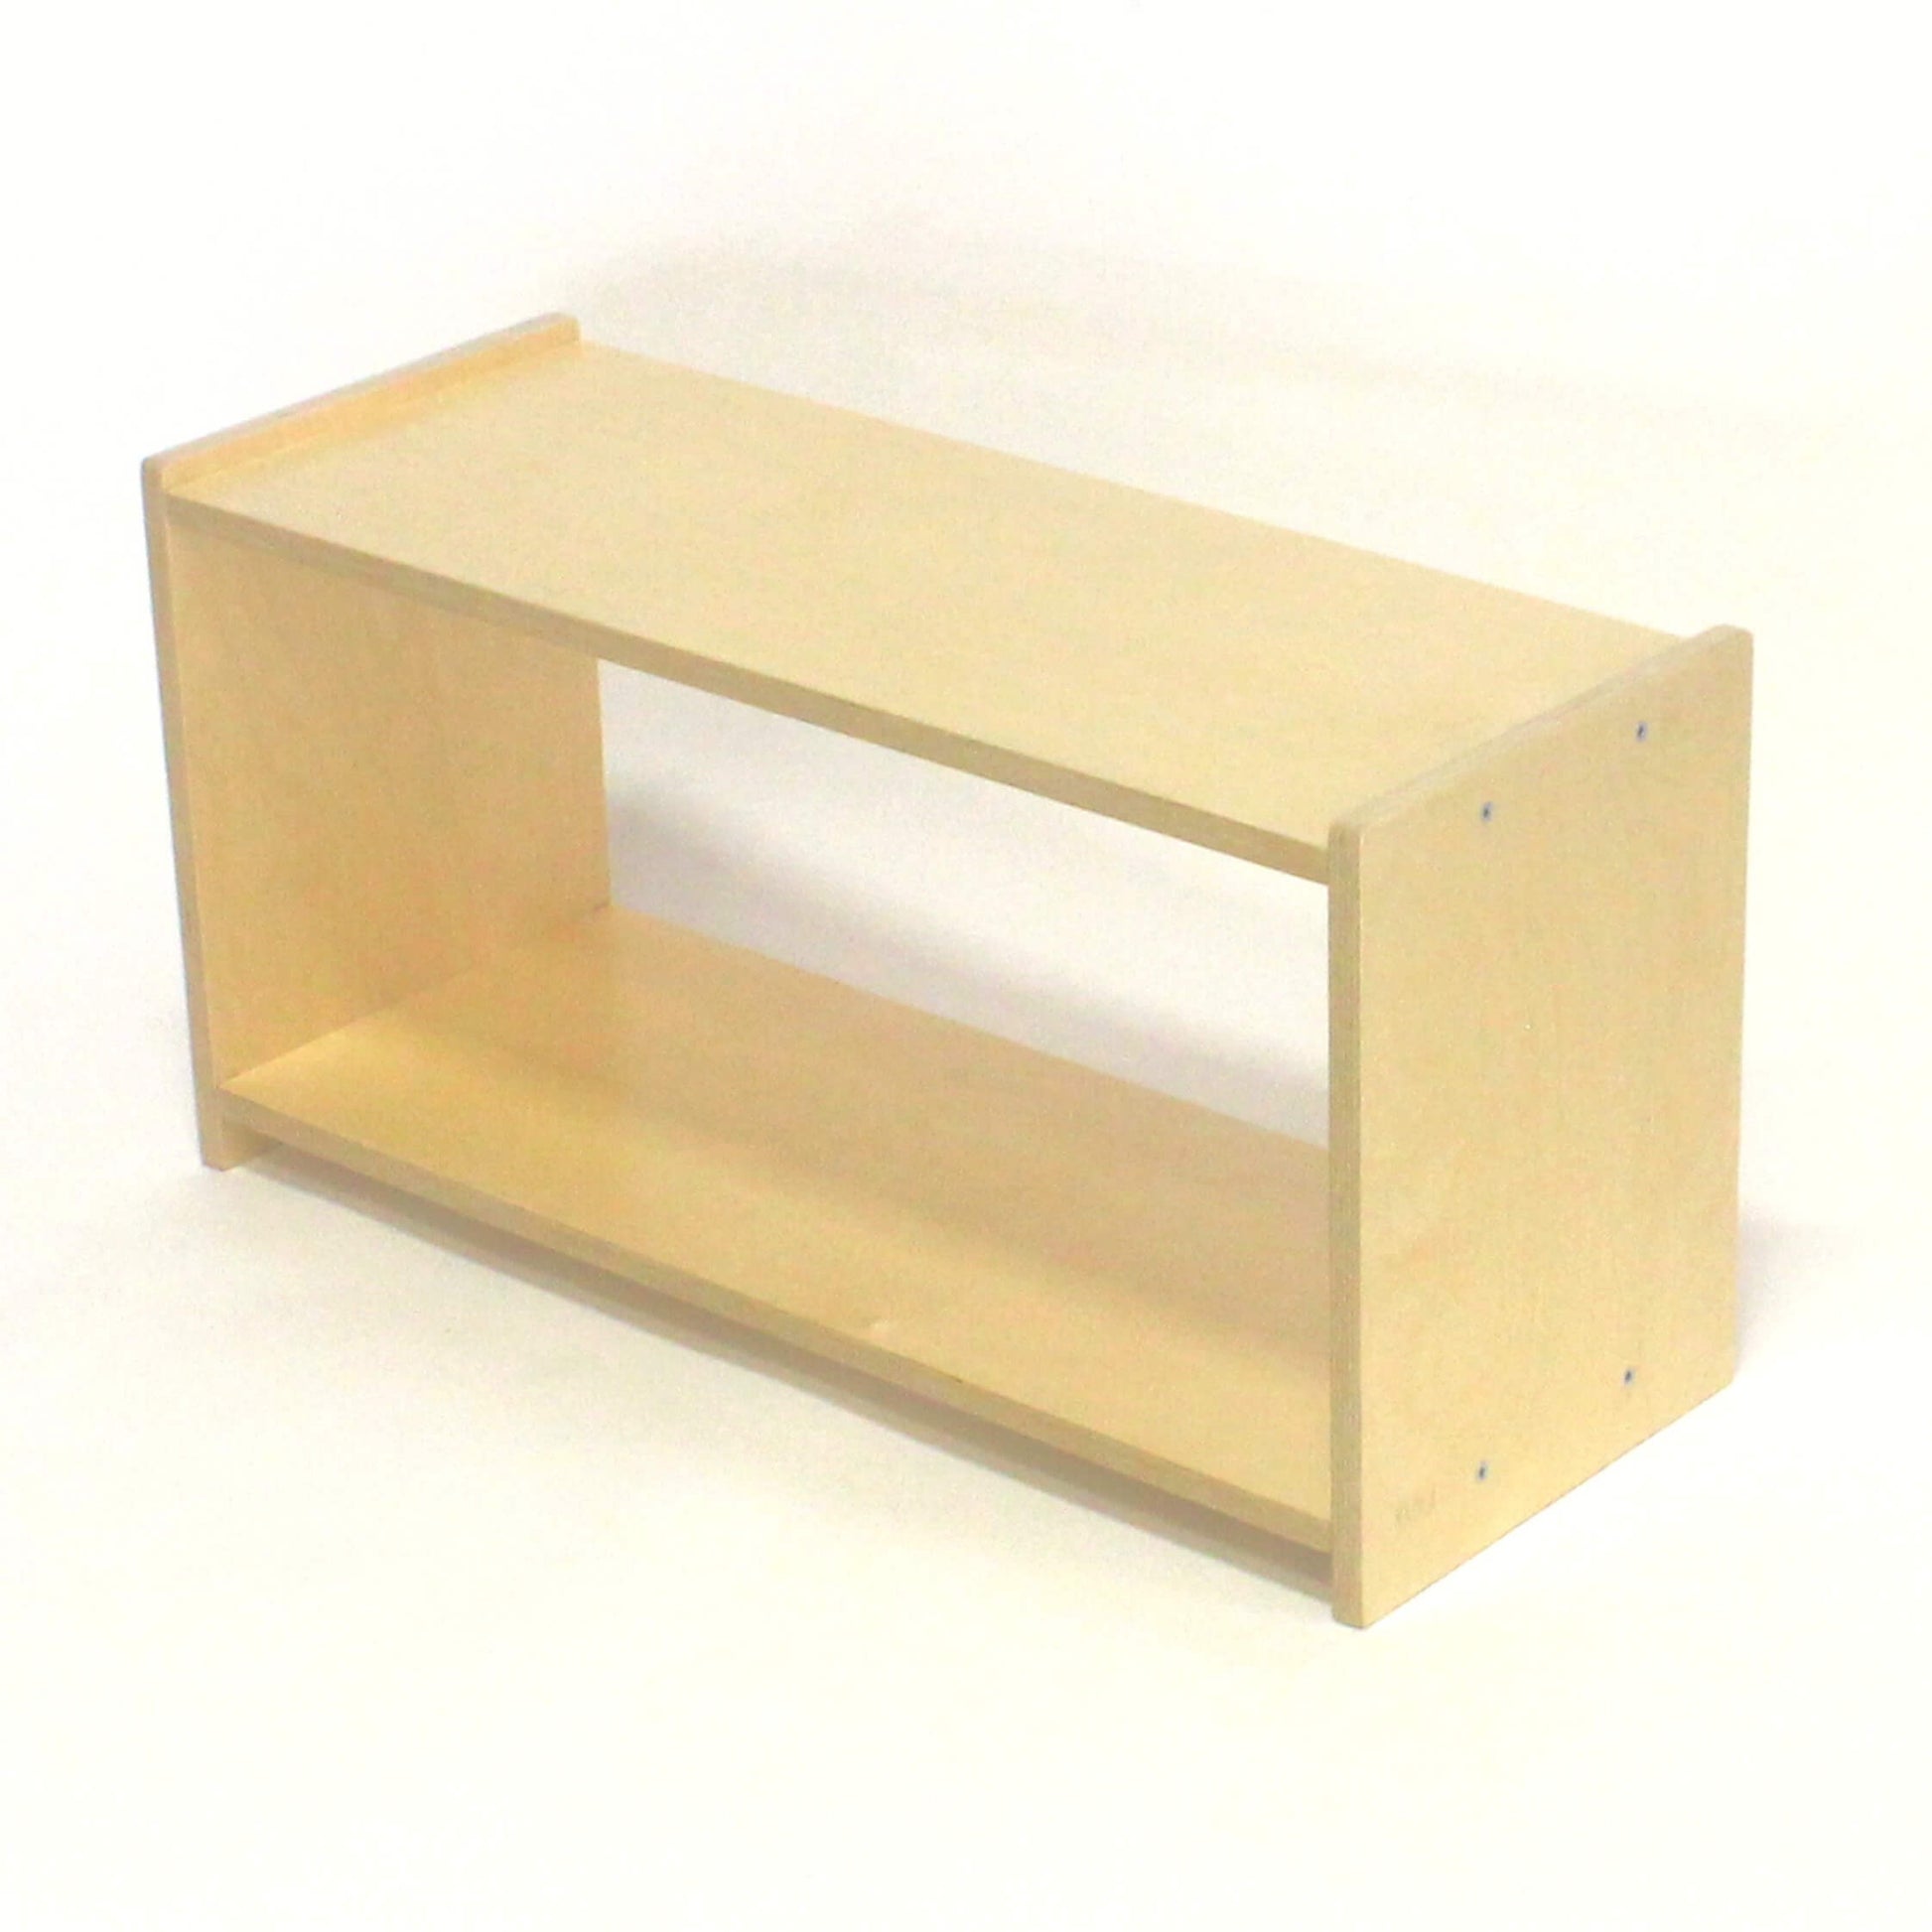 Low Wooden montessori shelves for babies infants toldders and children.  Proudly made in america